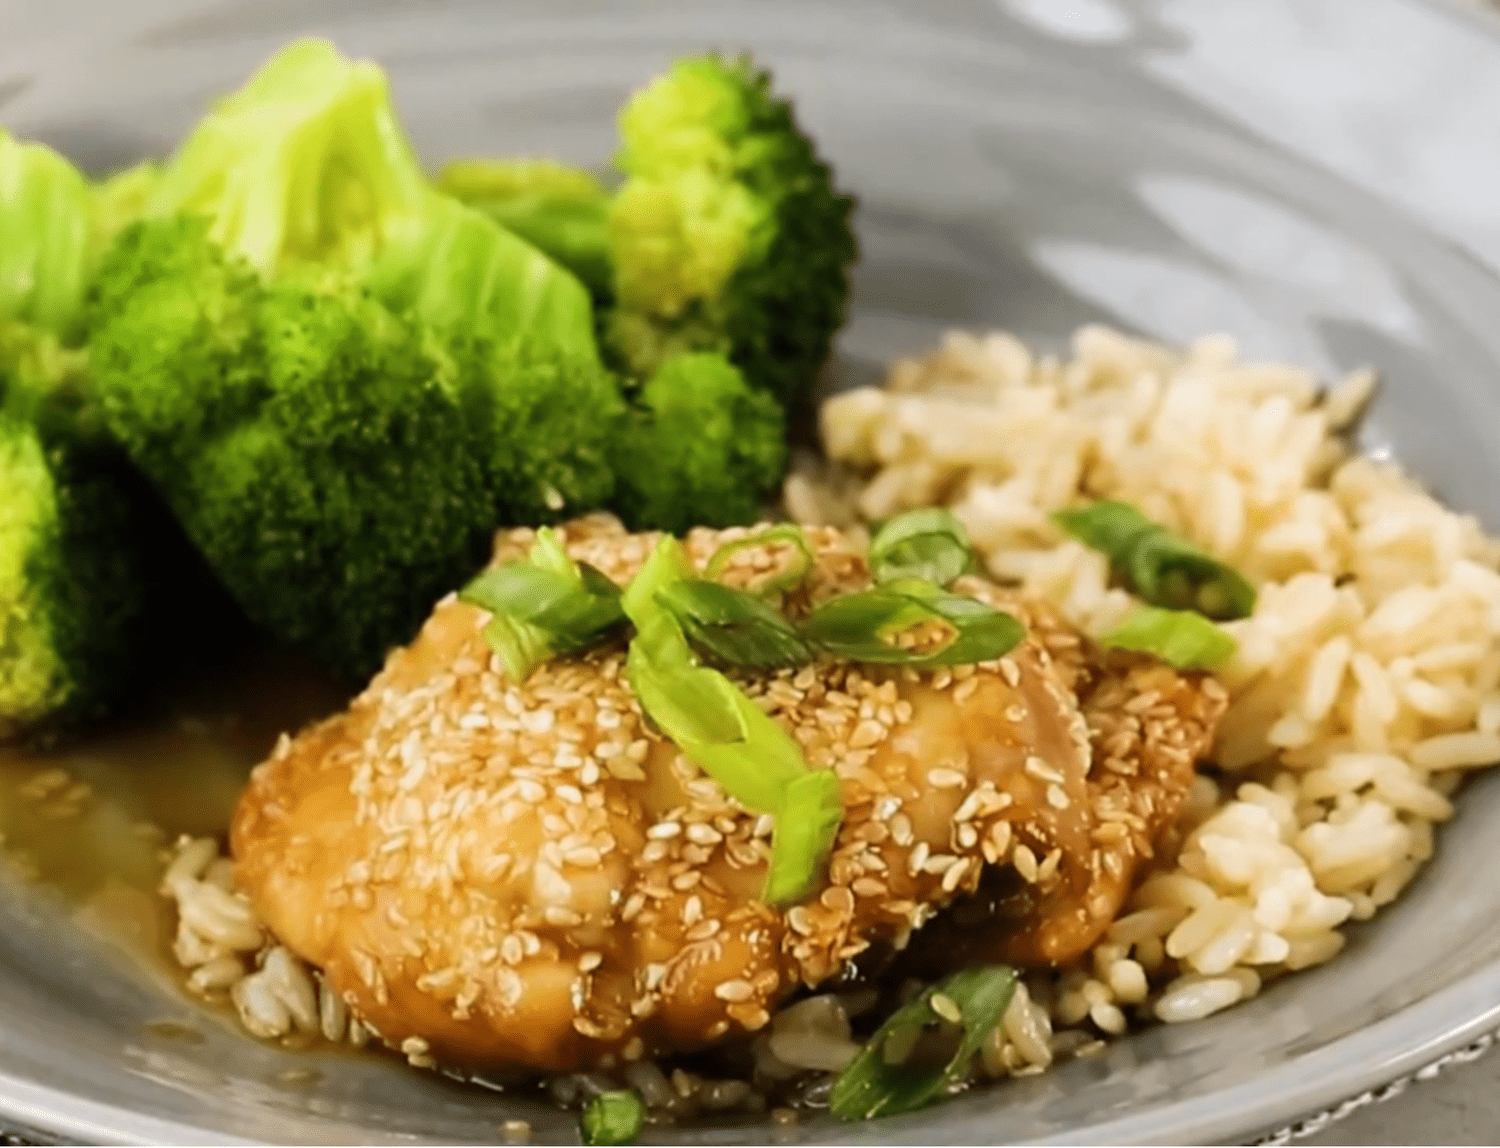 Sticky Sesame Chicken with broccoli and rice